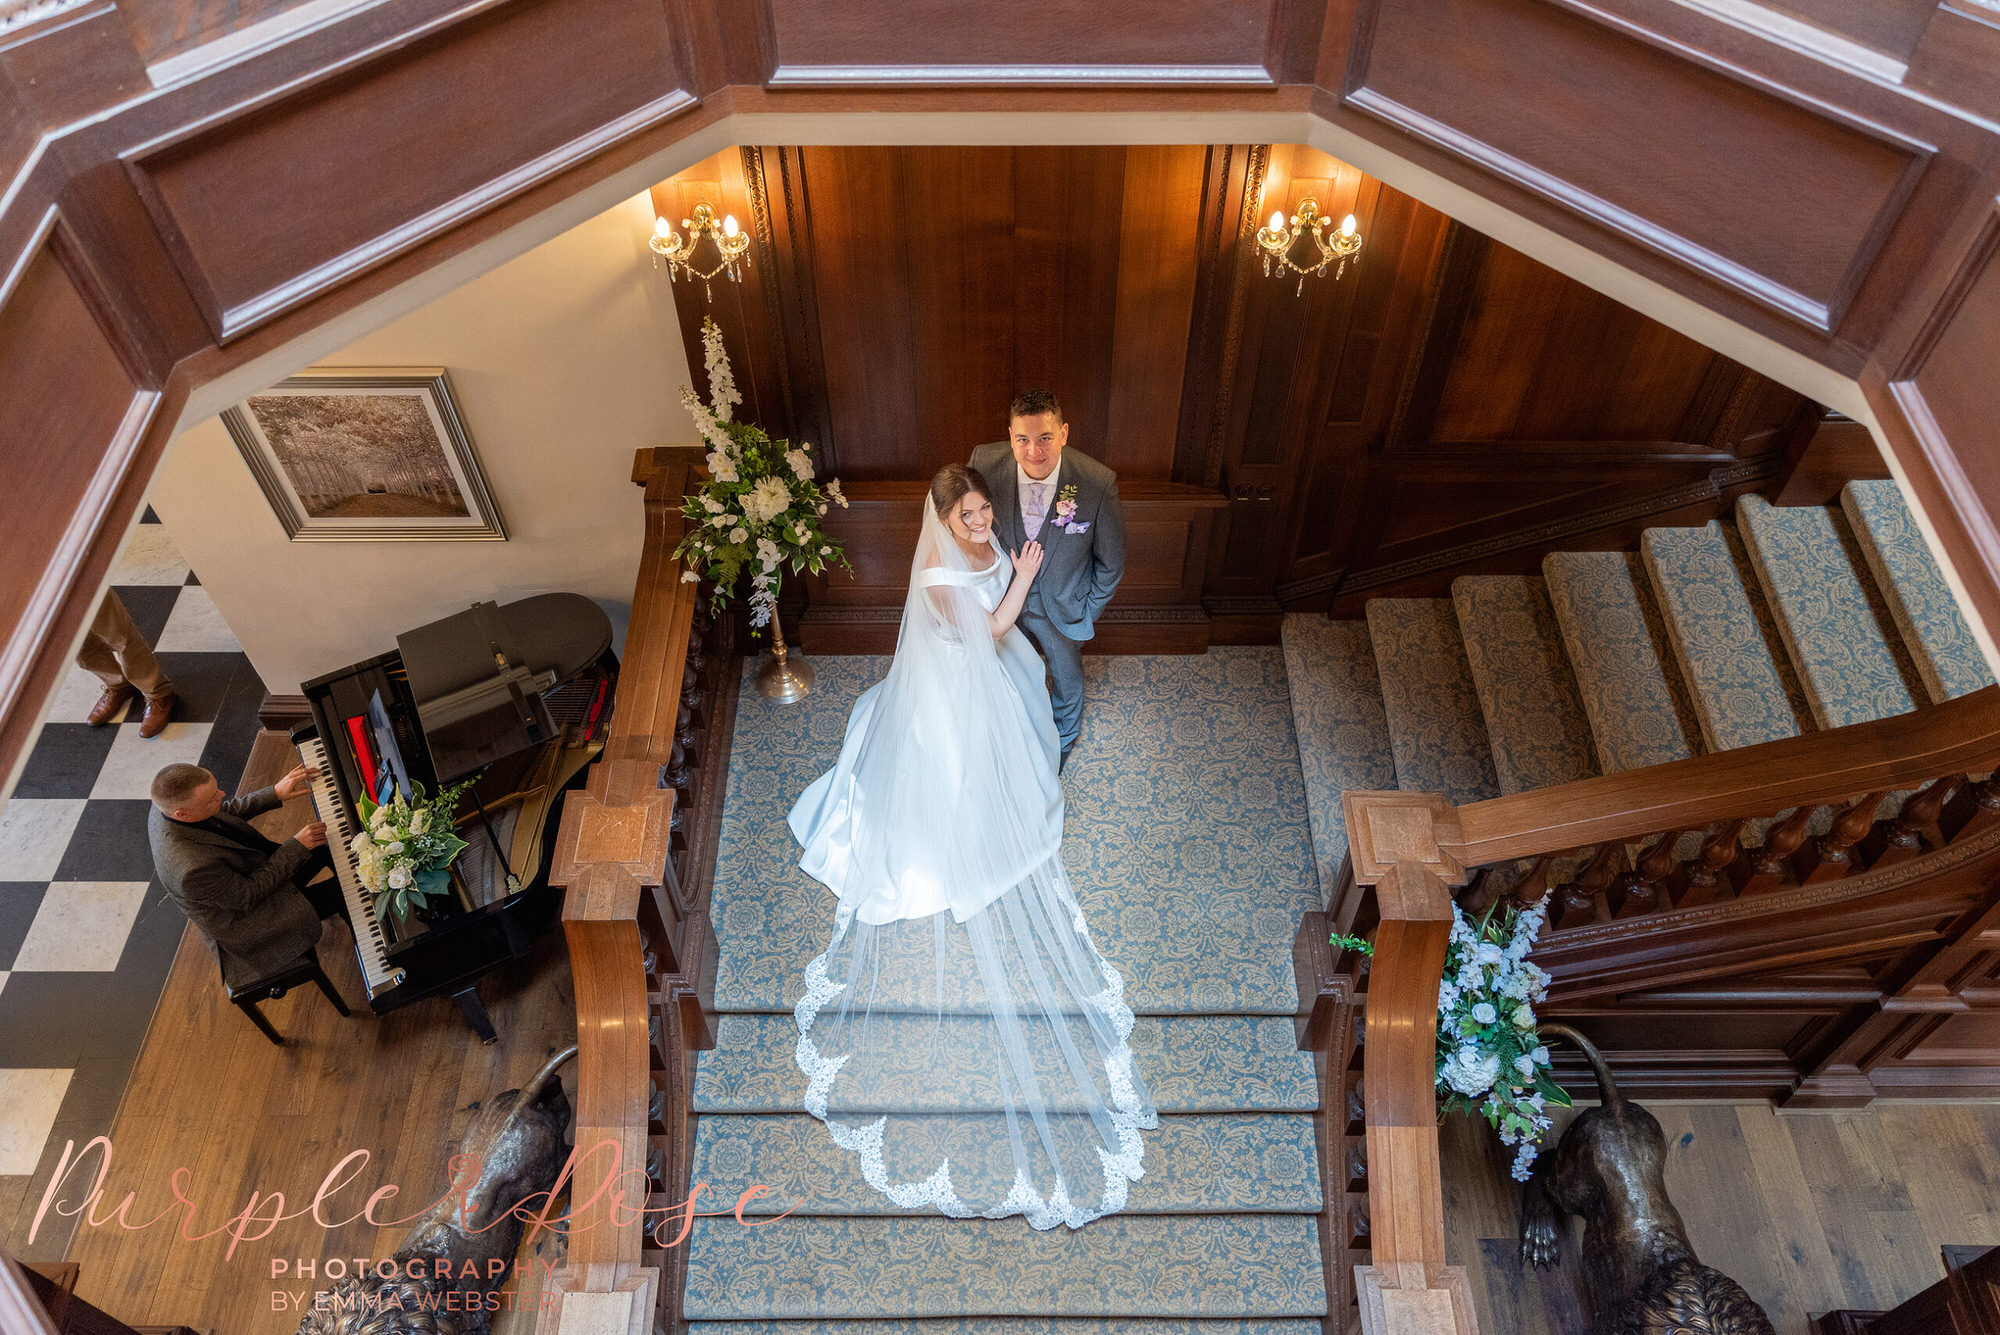 Bride and groom looking up from a staircase